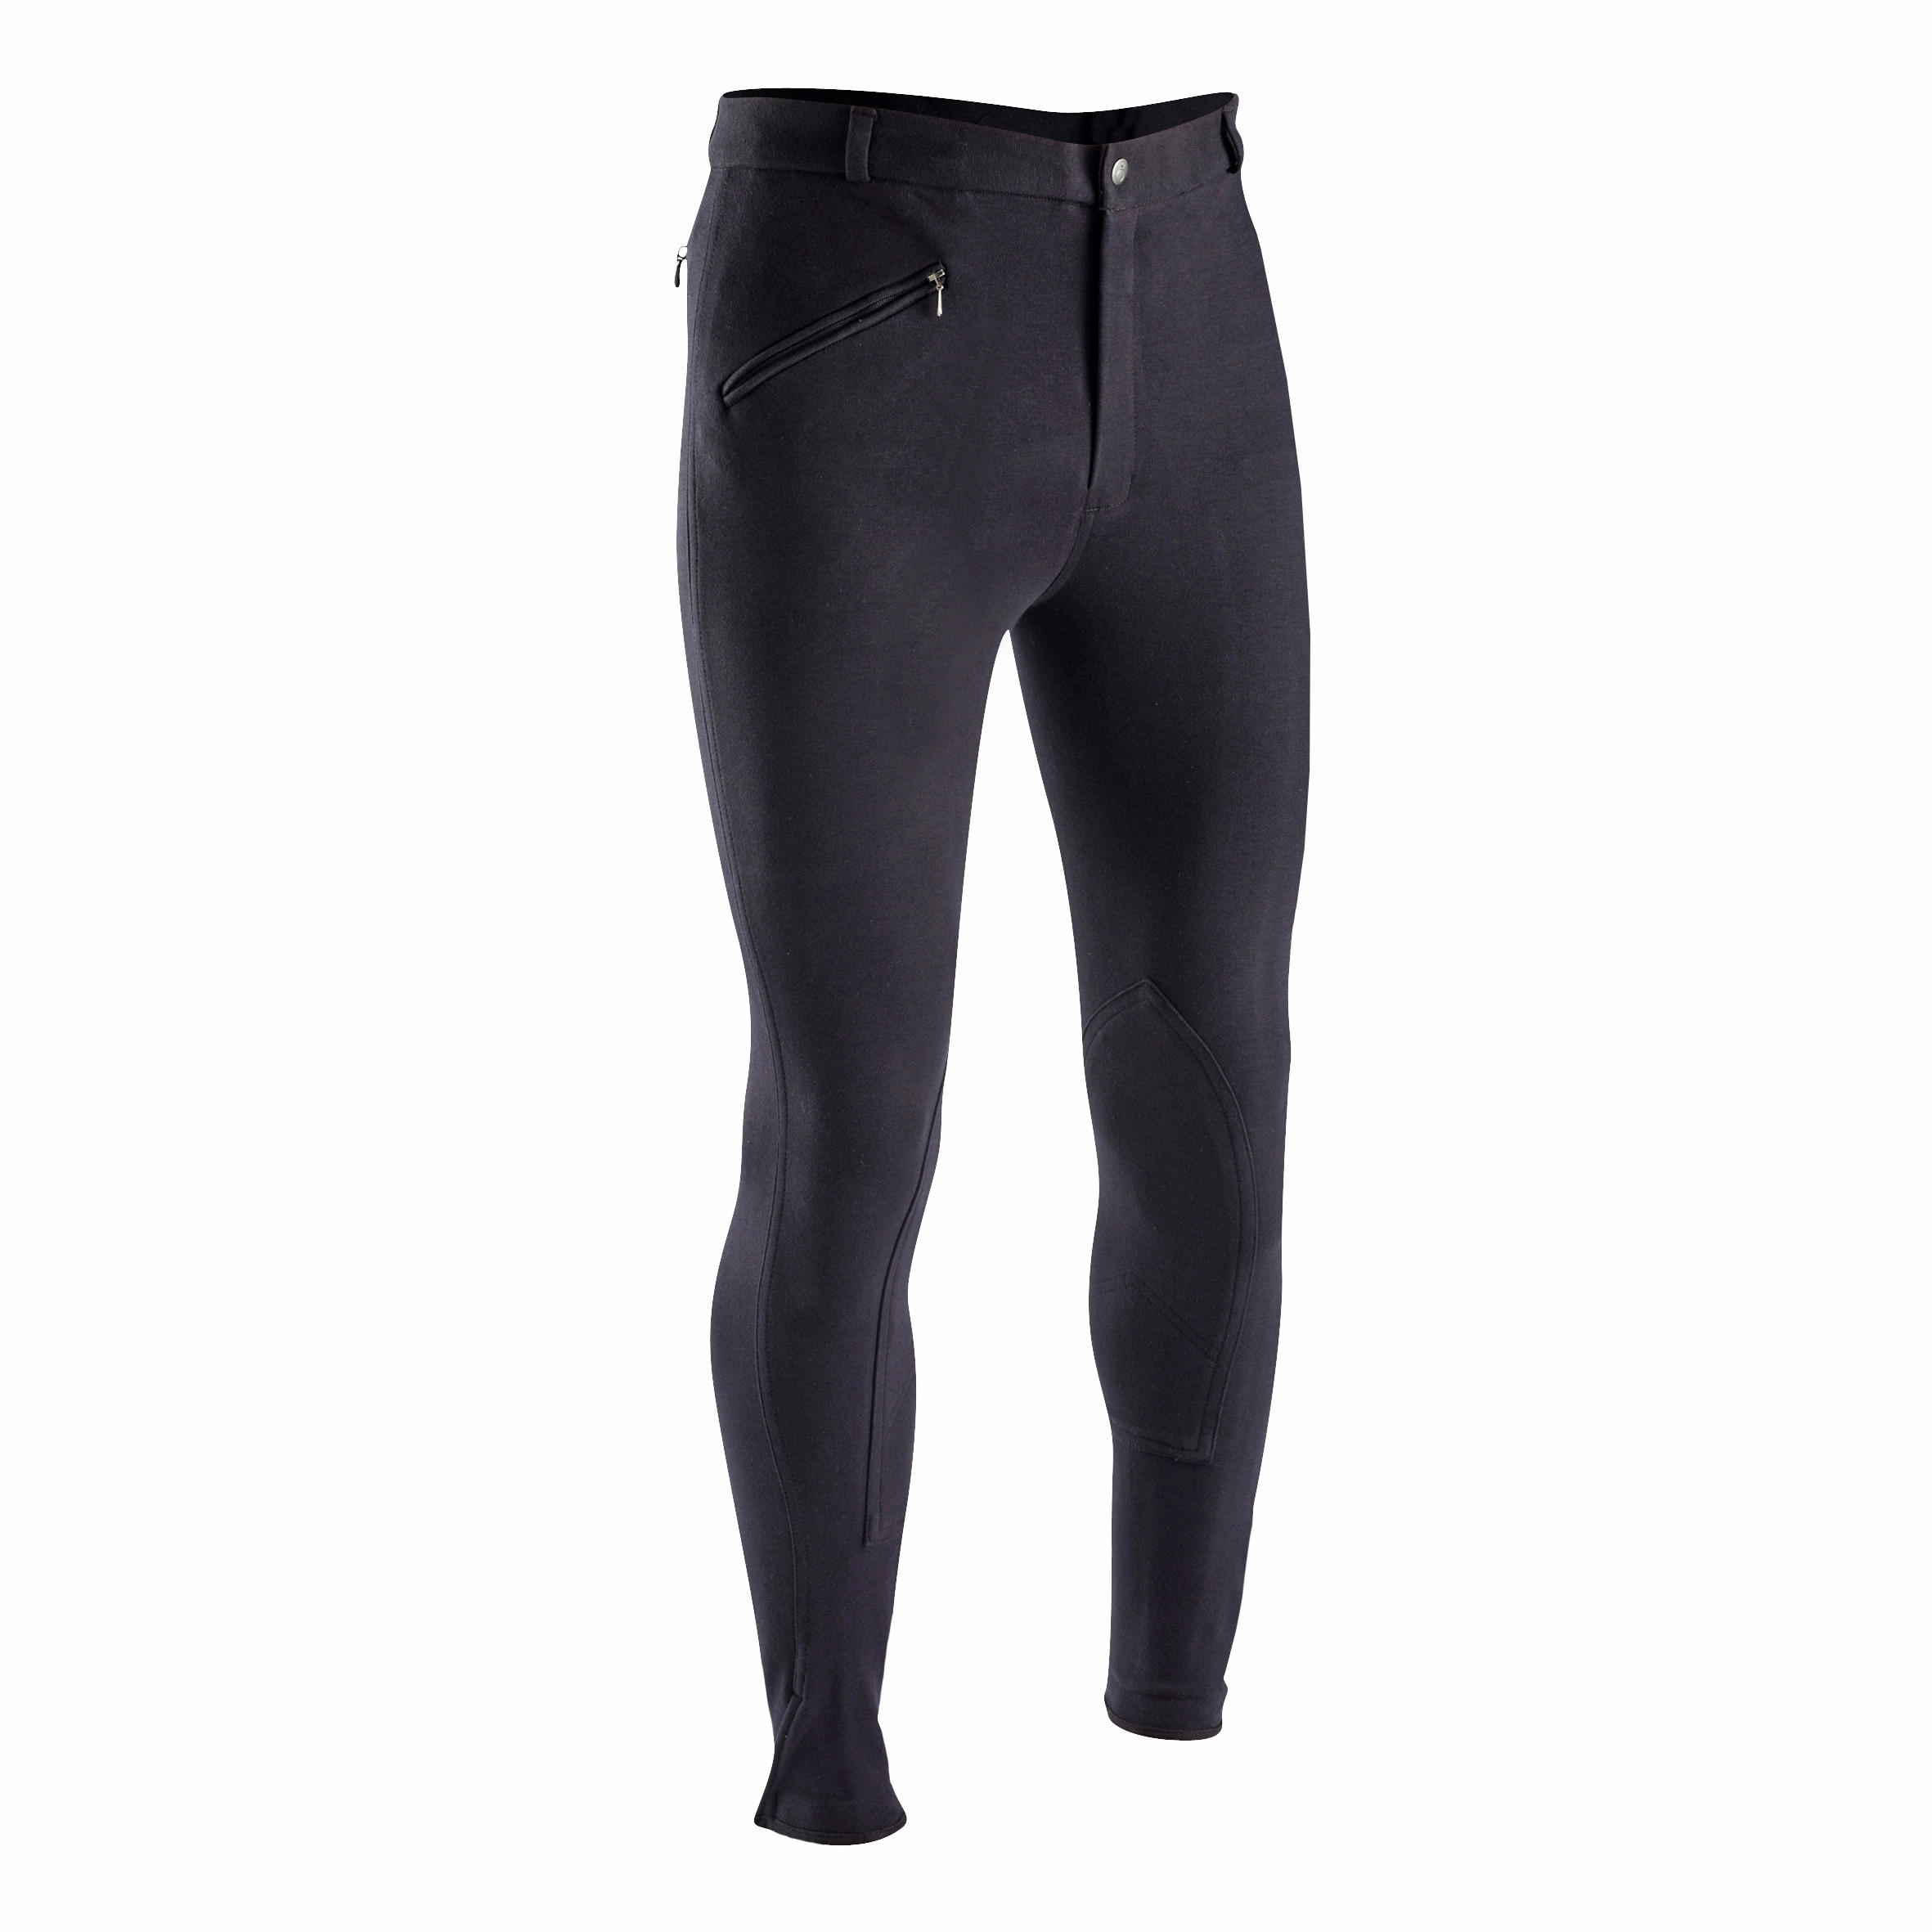 BBG Black Red Riding Pant  Buy online in India